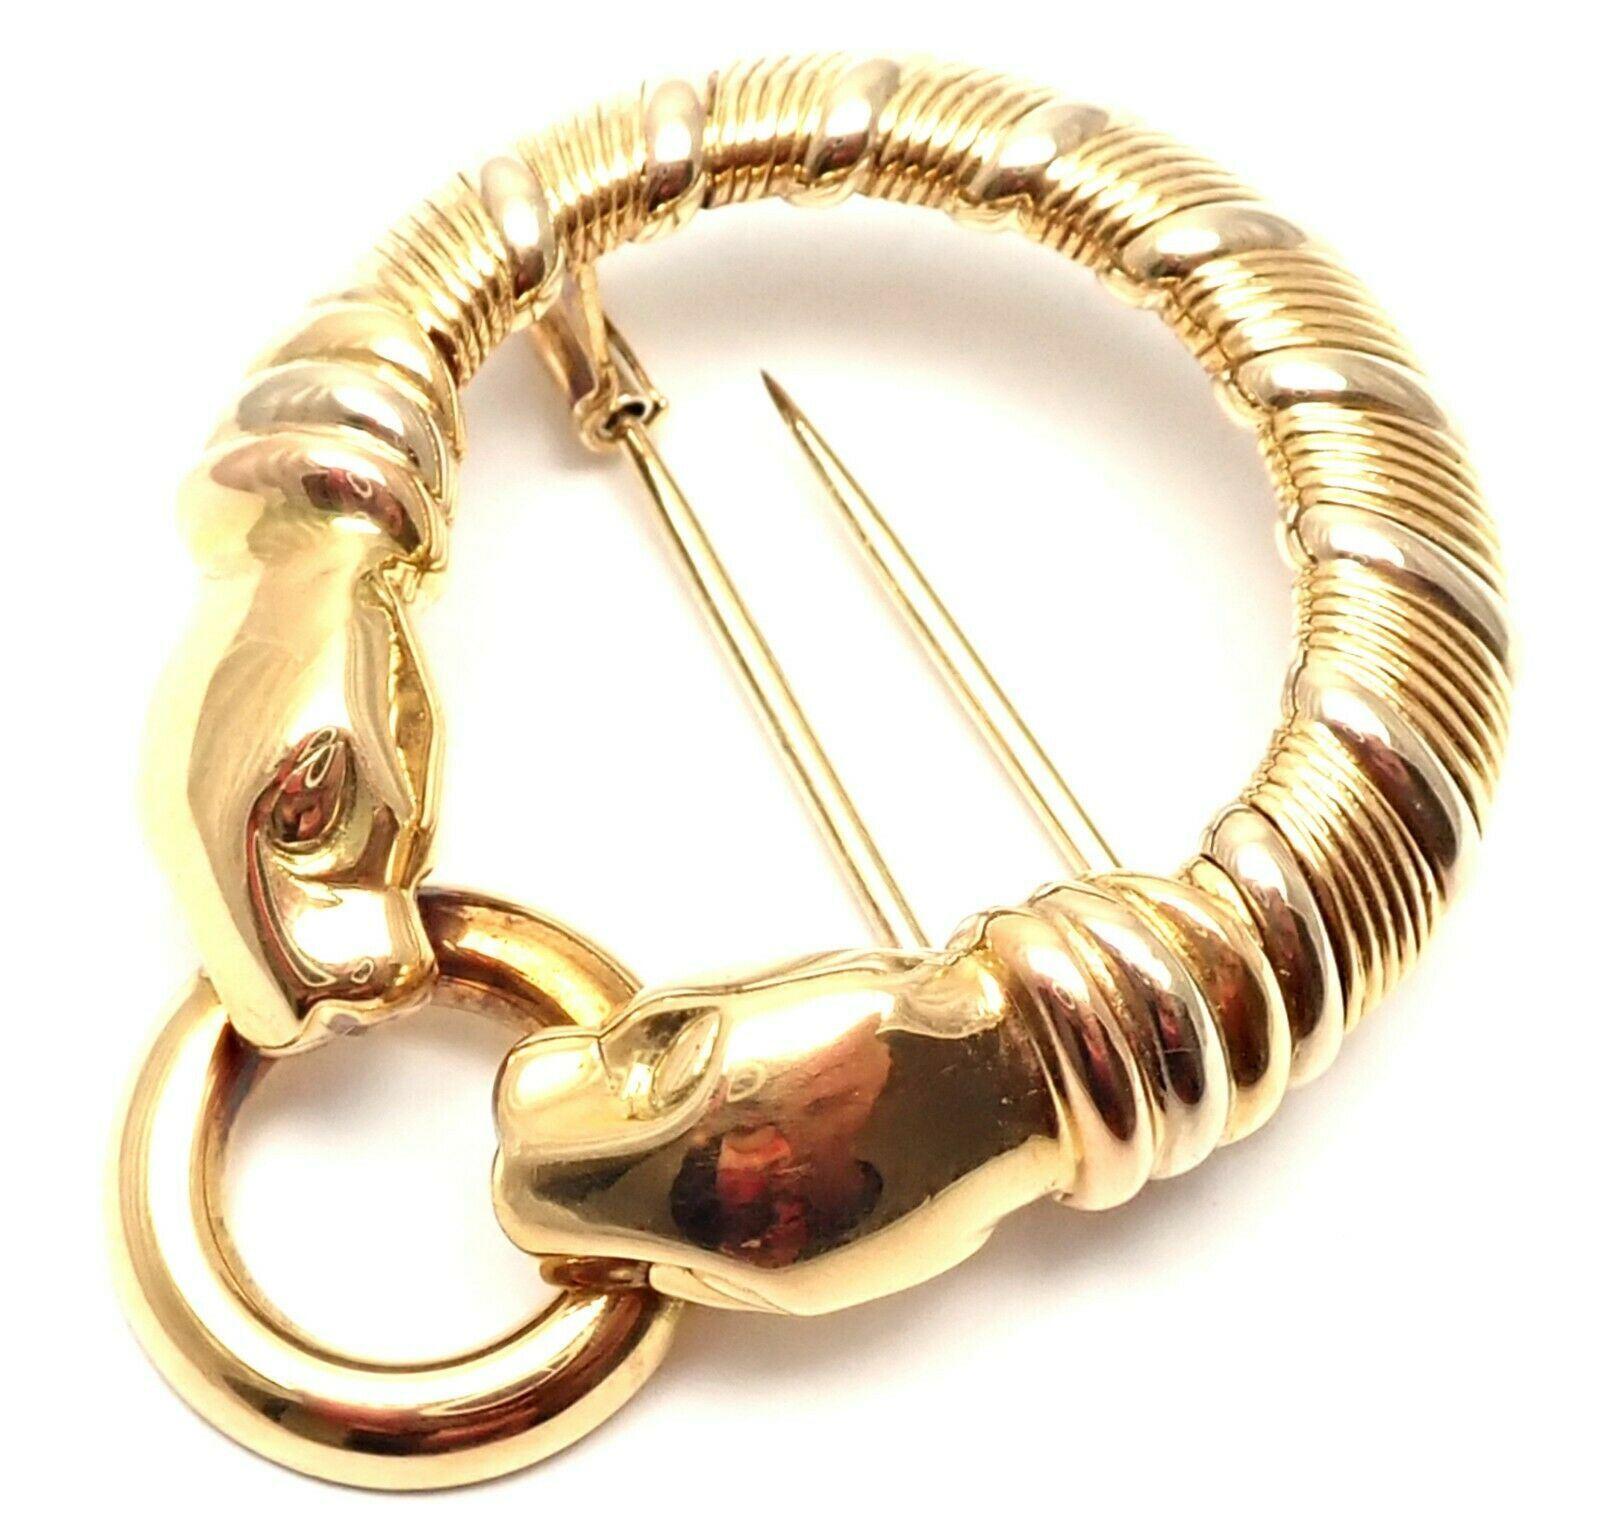 Cartier Panther Panthere Tri-Colored Gold Pin Brooch For Sale 2